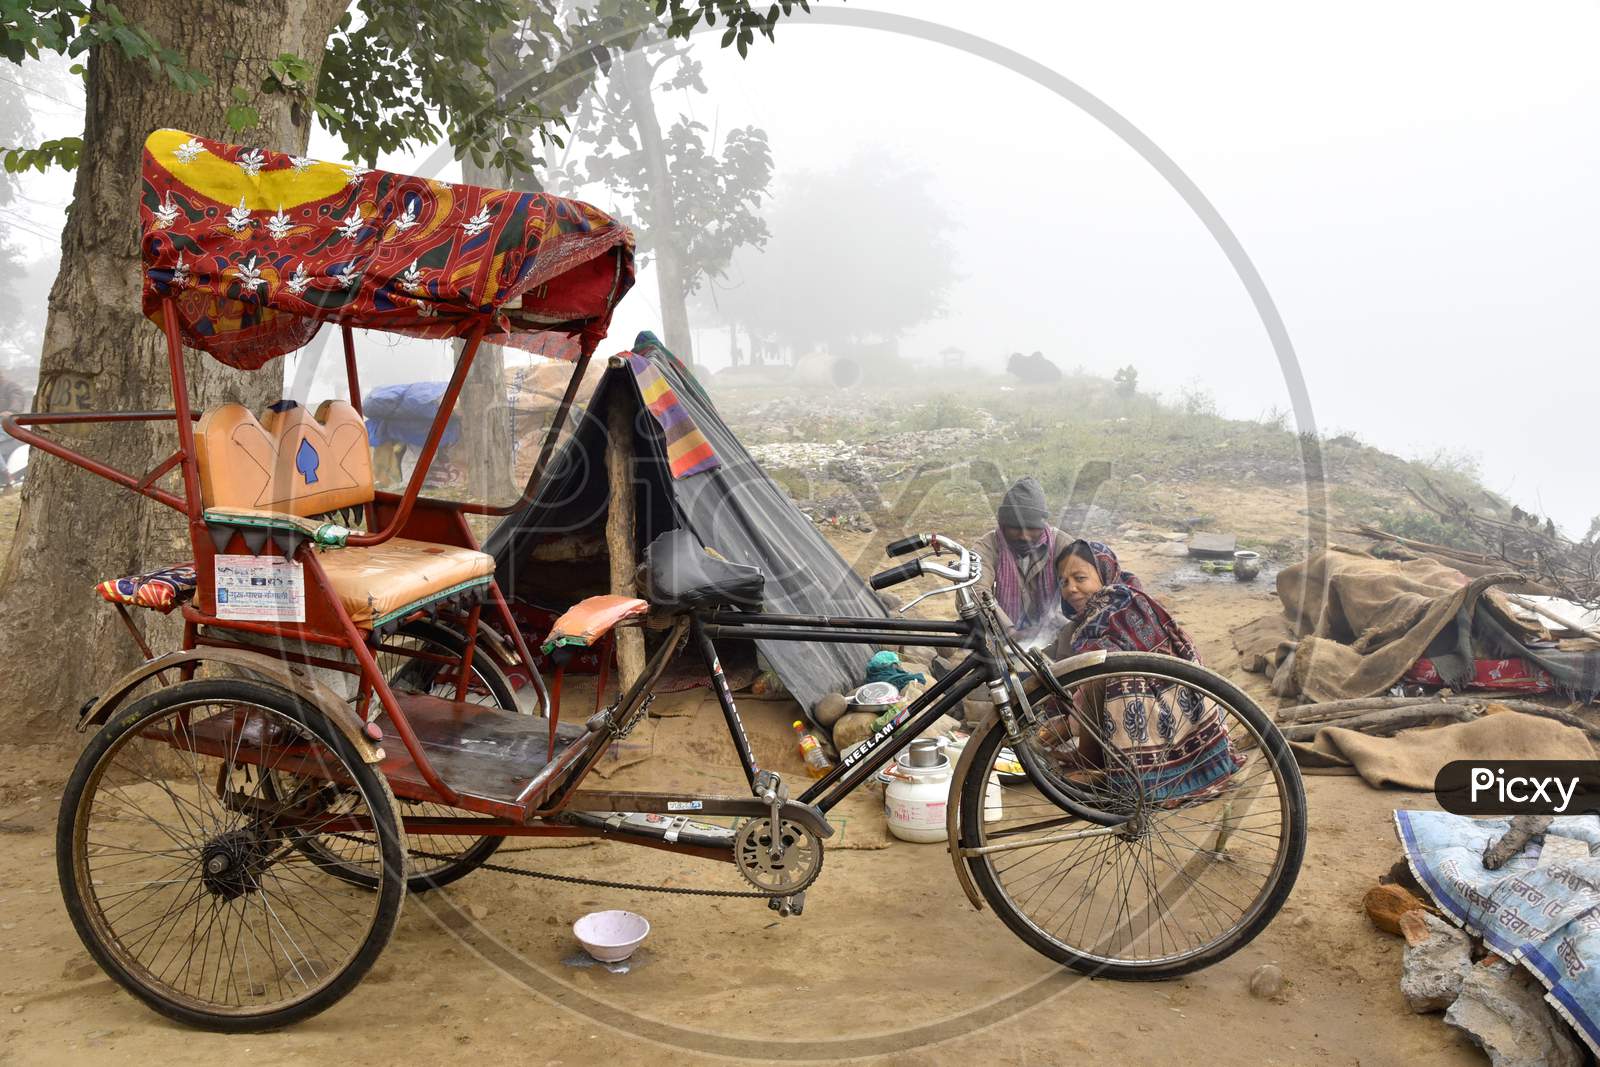 Indian Poor Families Living in Road side tents Or Huts